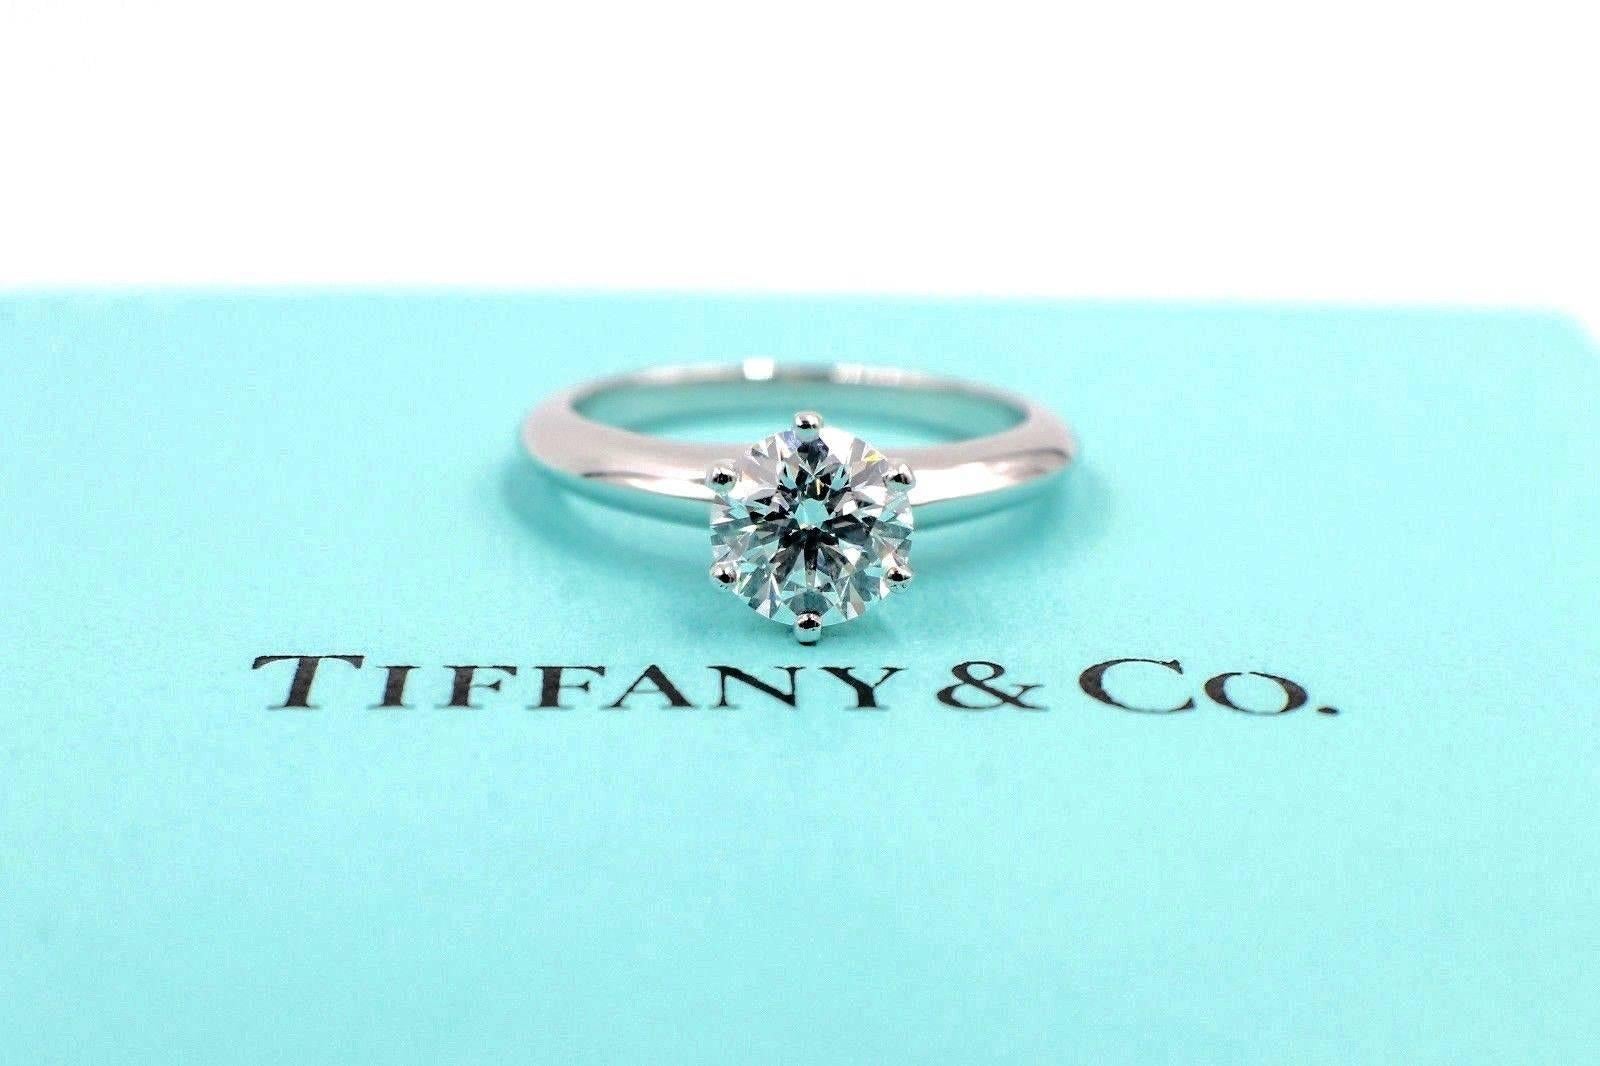 Tiffany & Co. Diamond Engagement Ring Round Solitaire 1.02 Carat H VS1 2